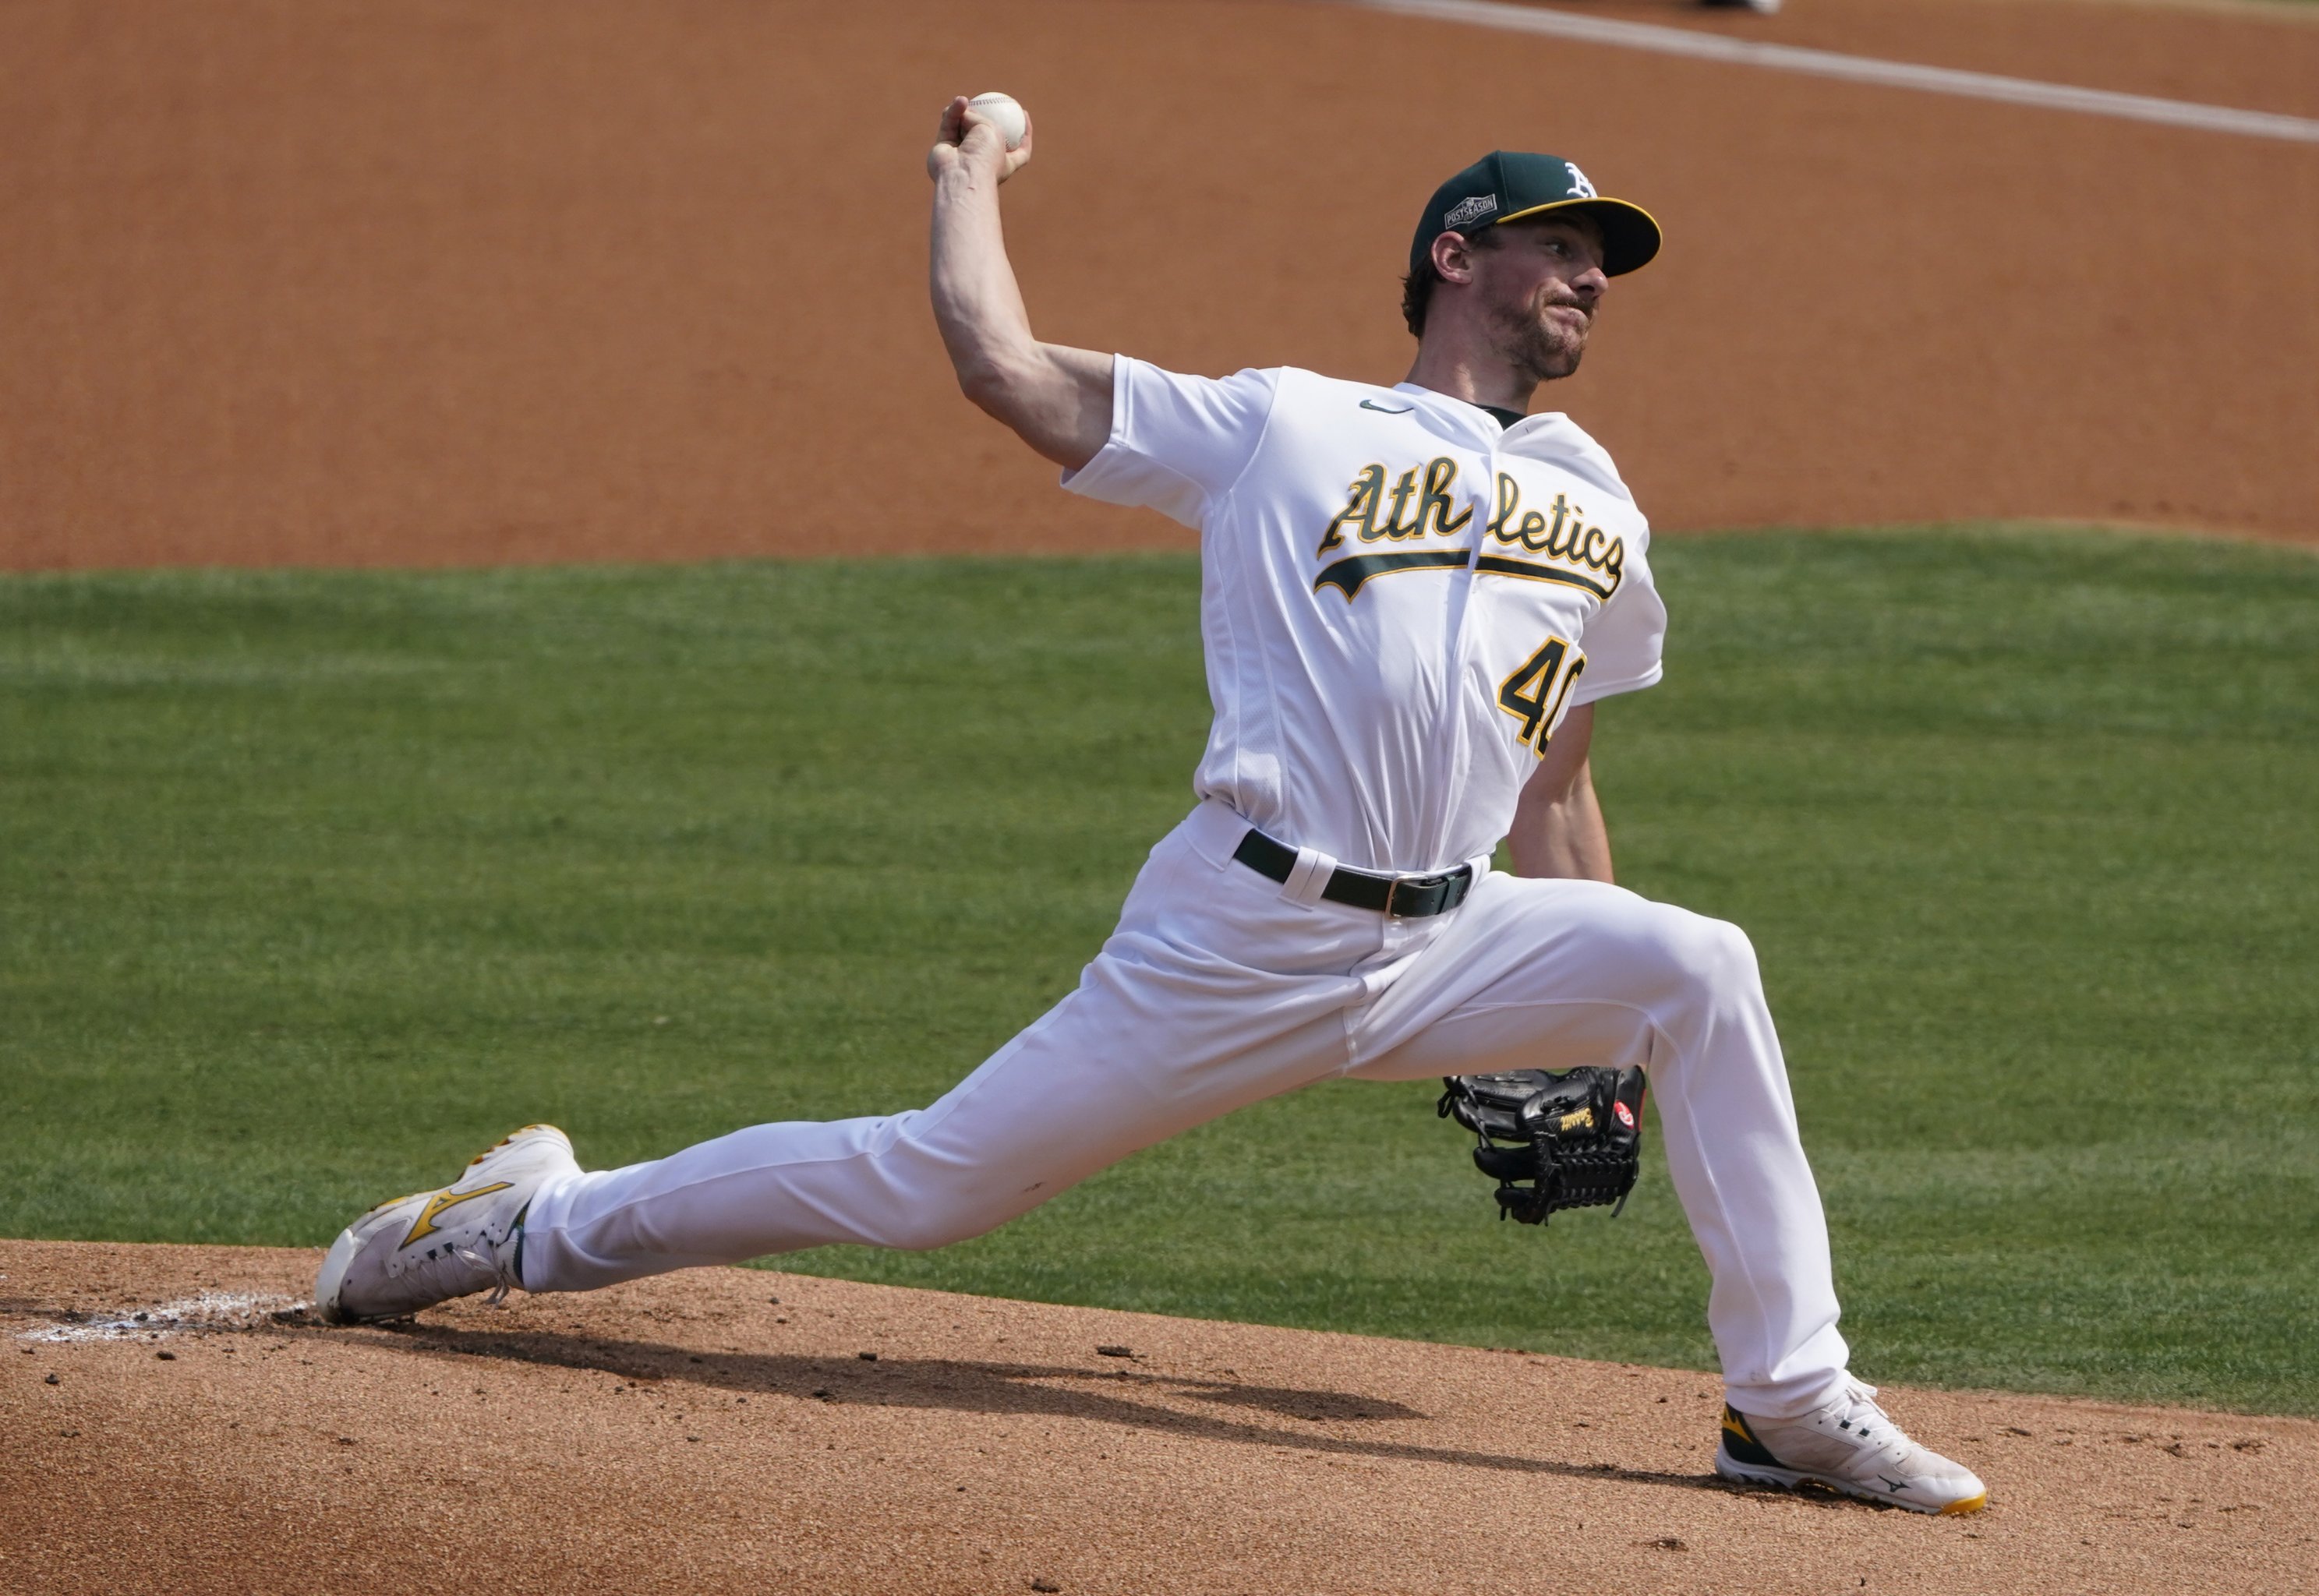 Oakland A's prospect watch: Sonny Gray trade package has risk but huge  upside - Athletics Nation